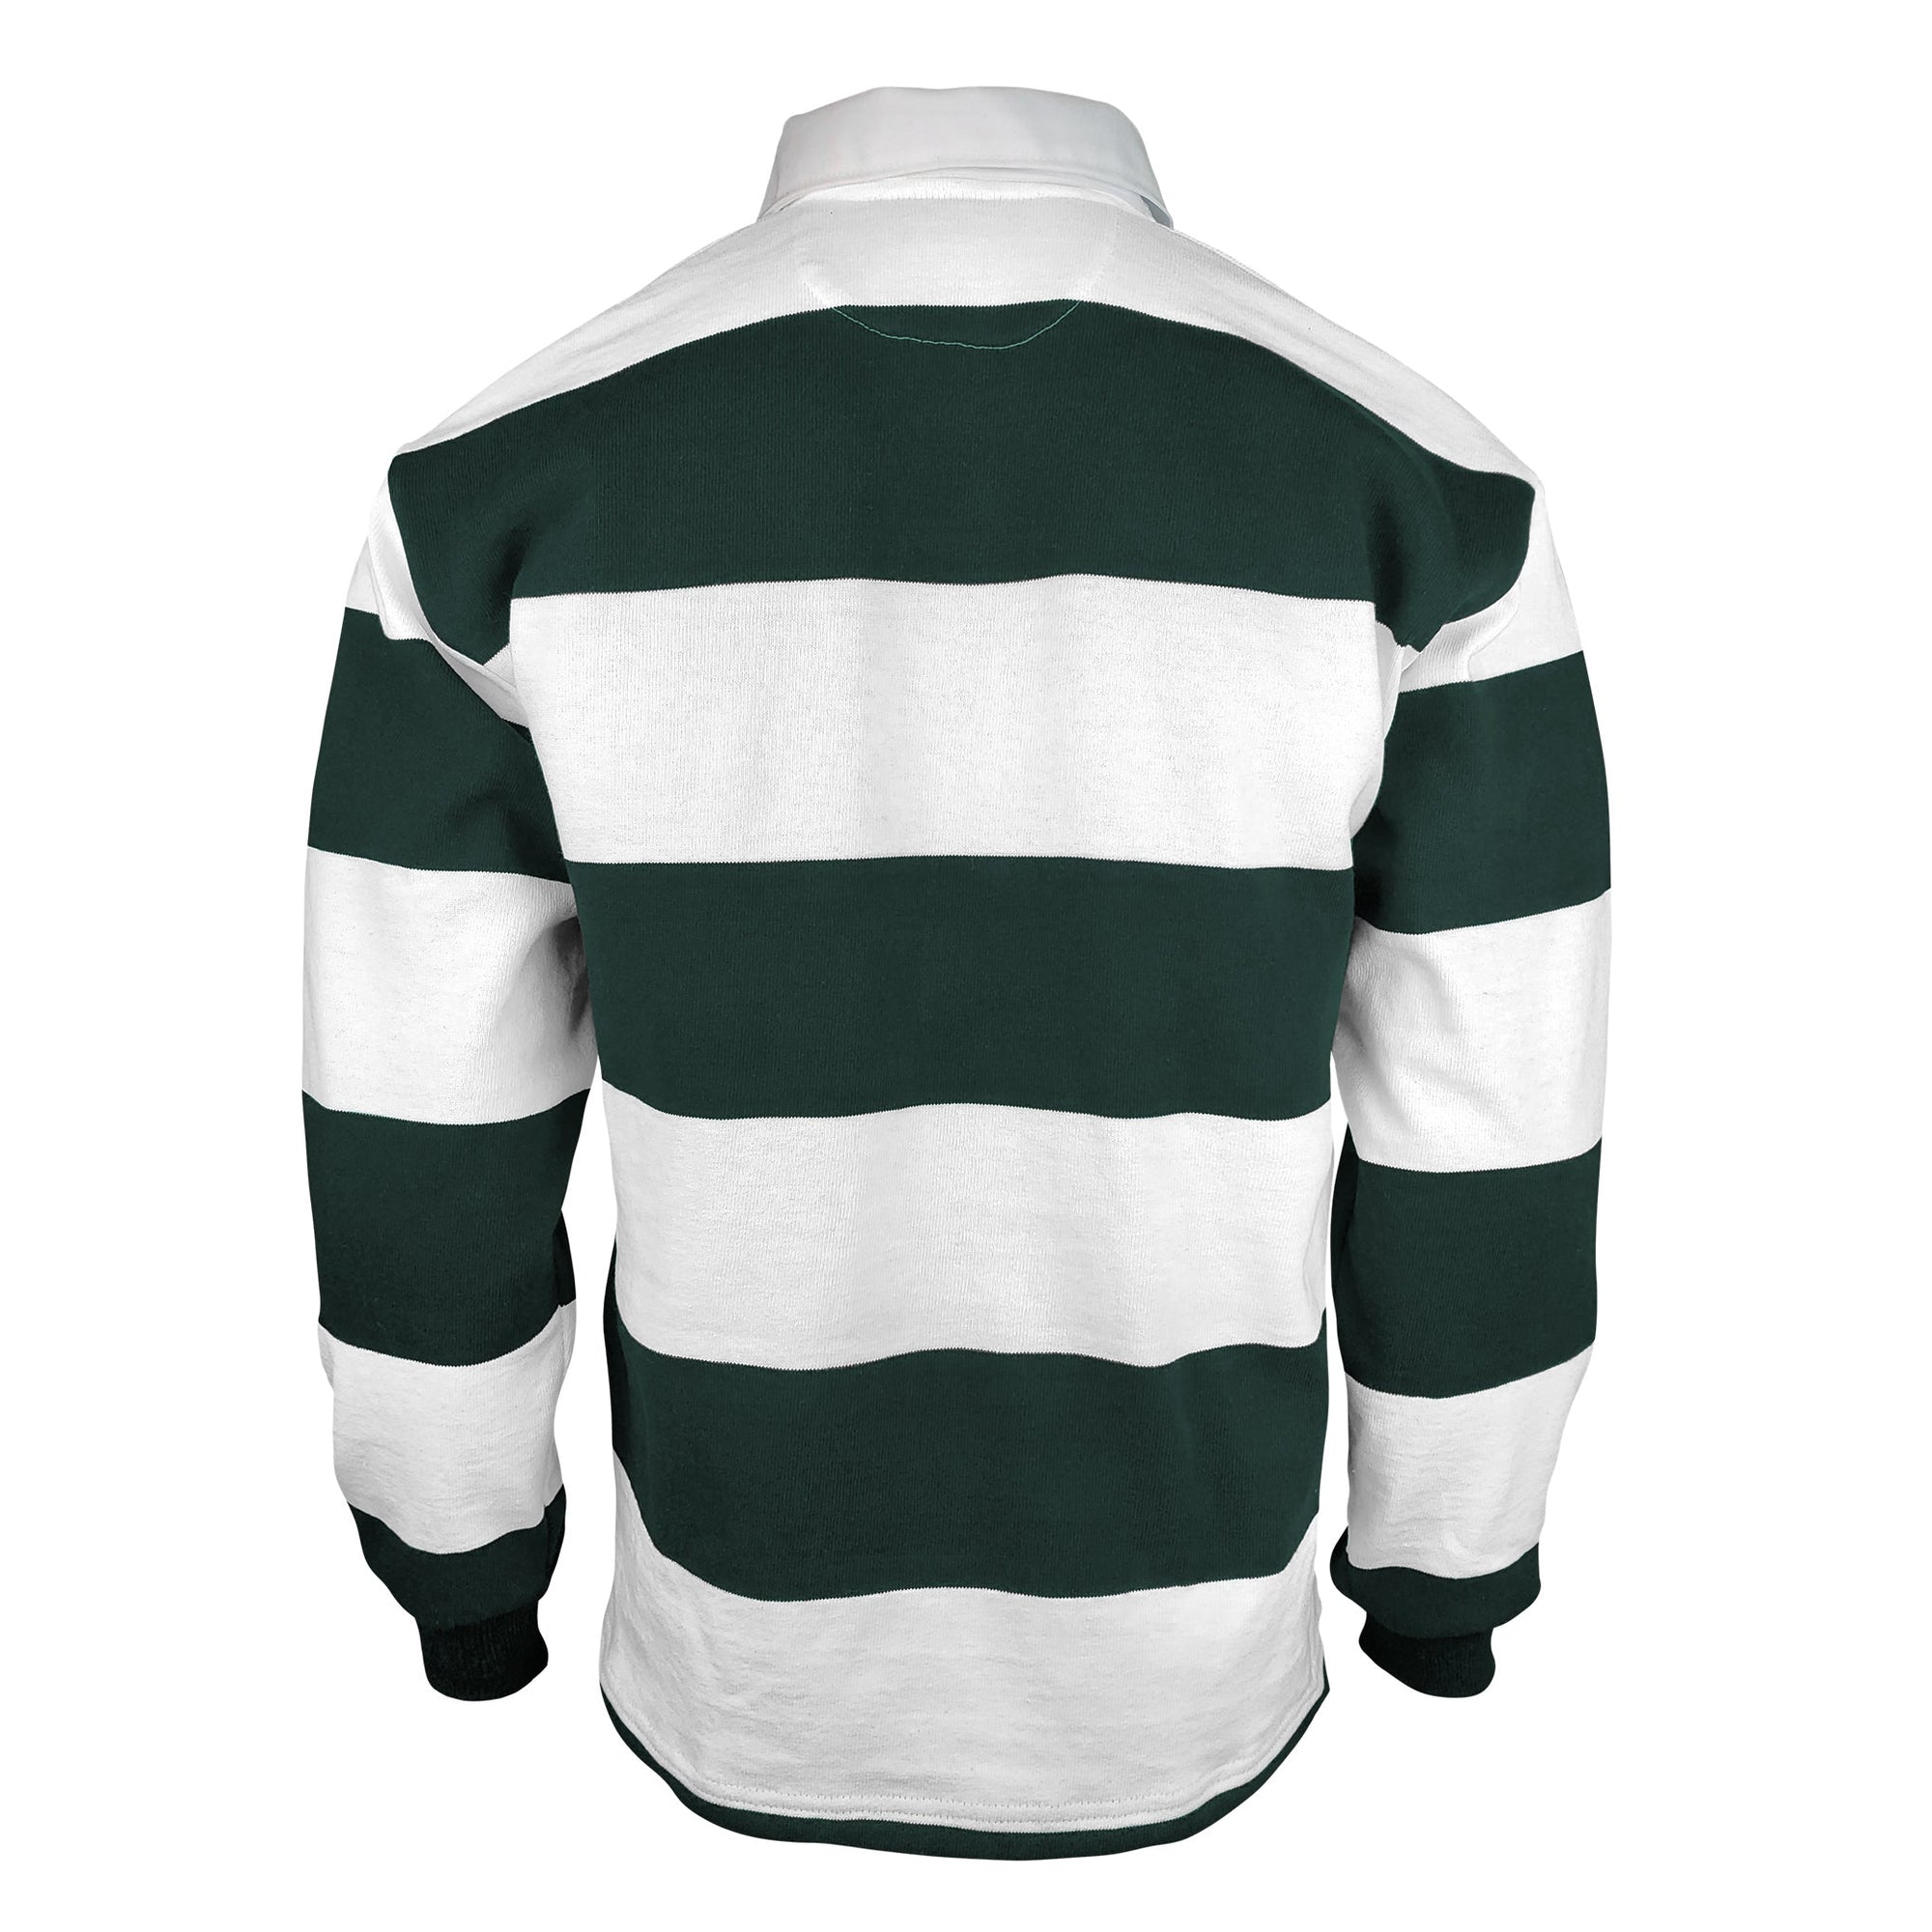 Rugby Imports Quad City Irish Casual Weight Stripe Jersey